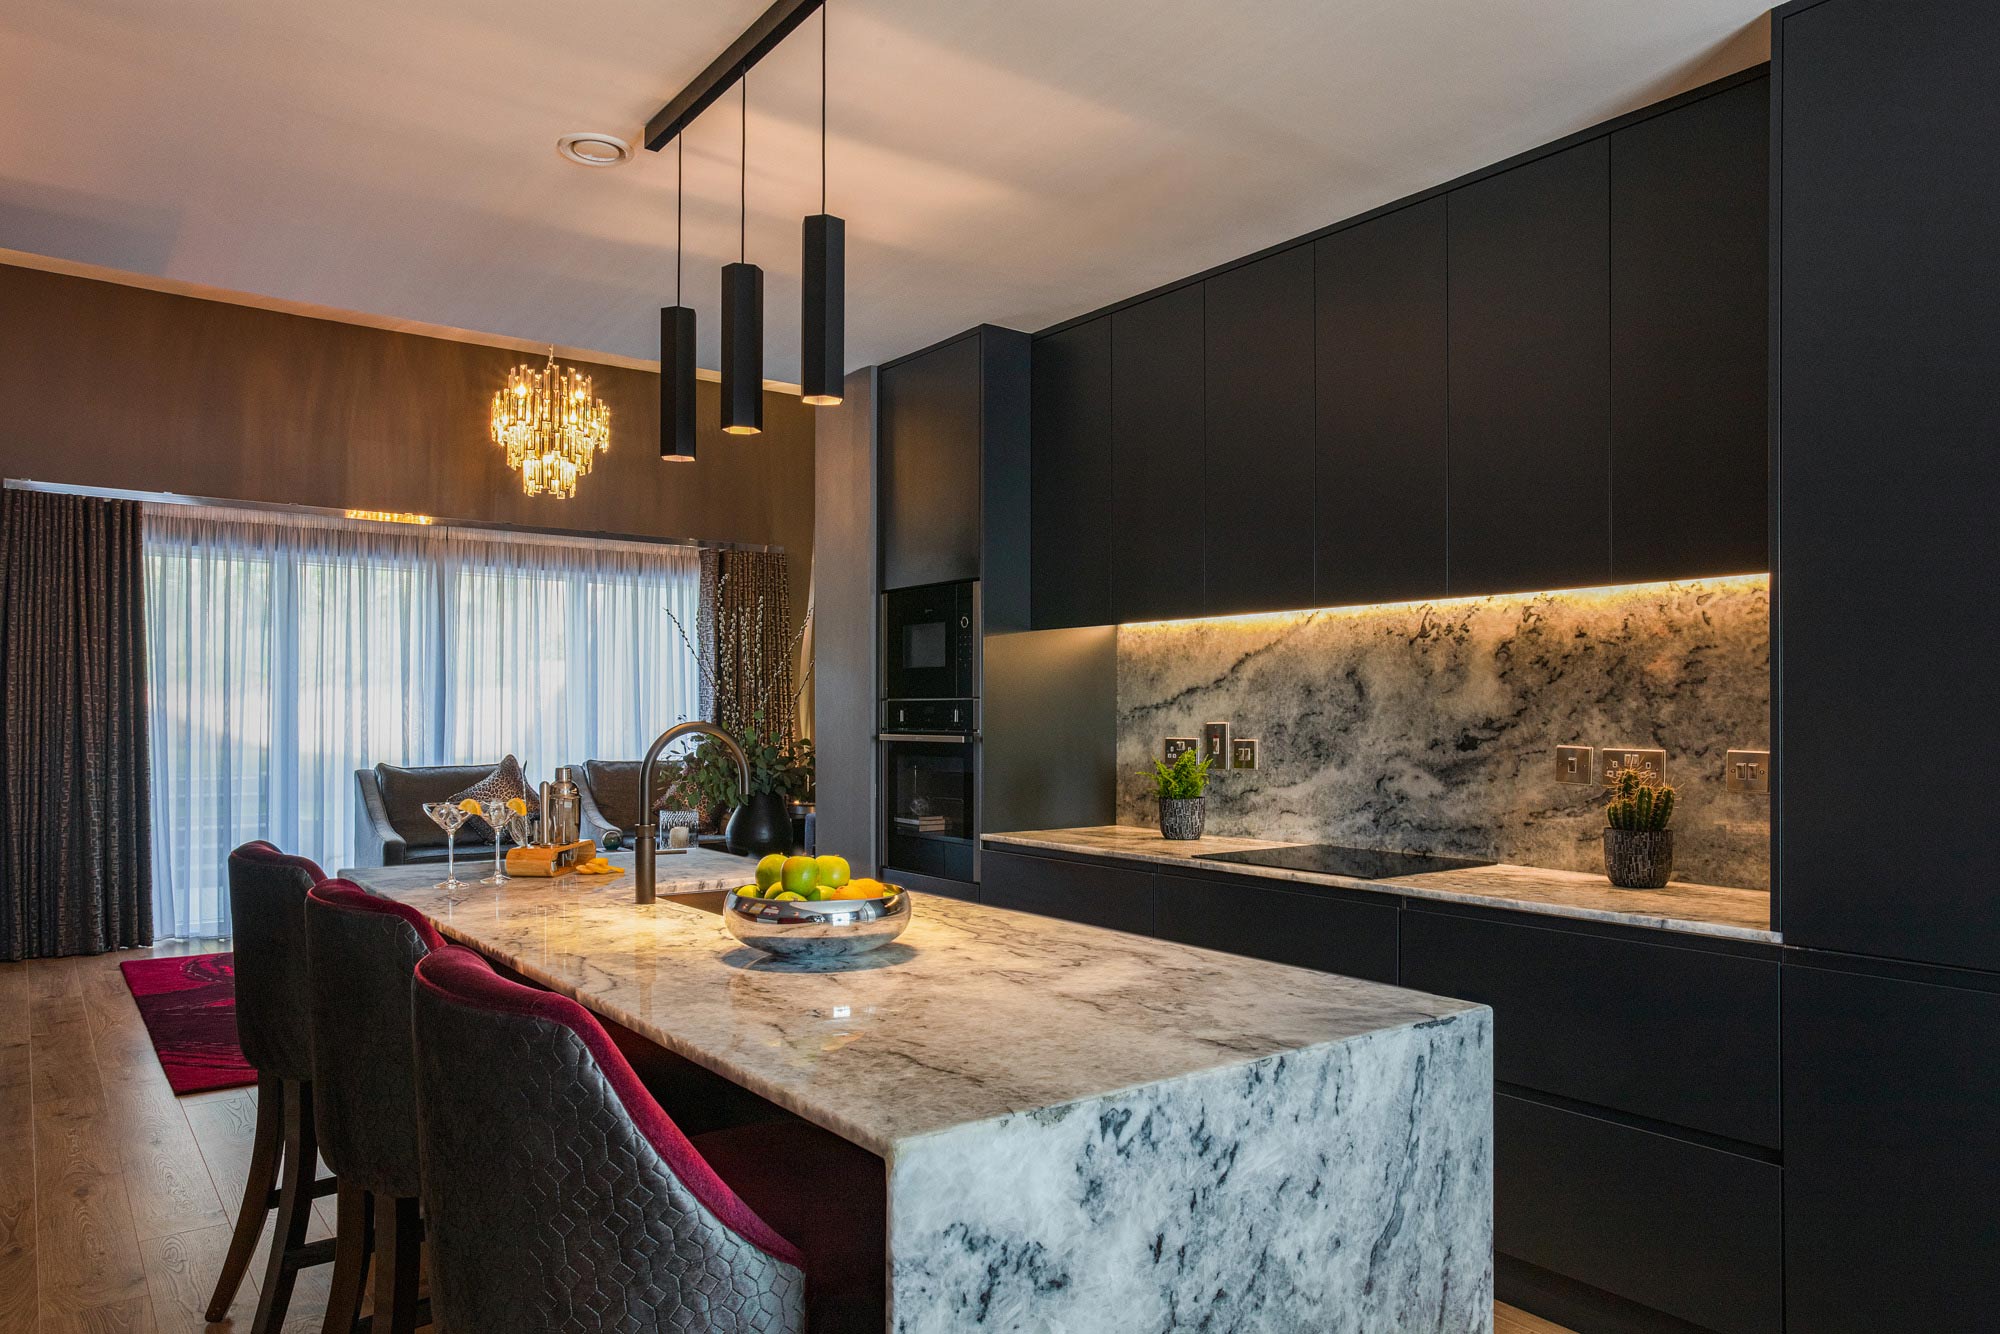 Image of Cosentino Enniskerry web 3 in The sophisticated and exclusive Scalea Equinox stone is a real eye-catcher in this opulent kitchen with dramatic tones - Cosentino